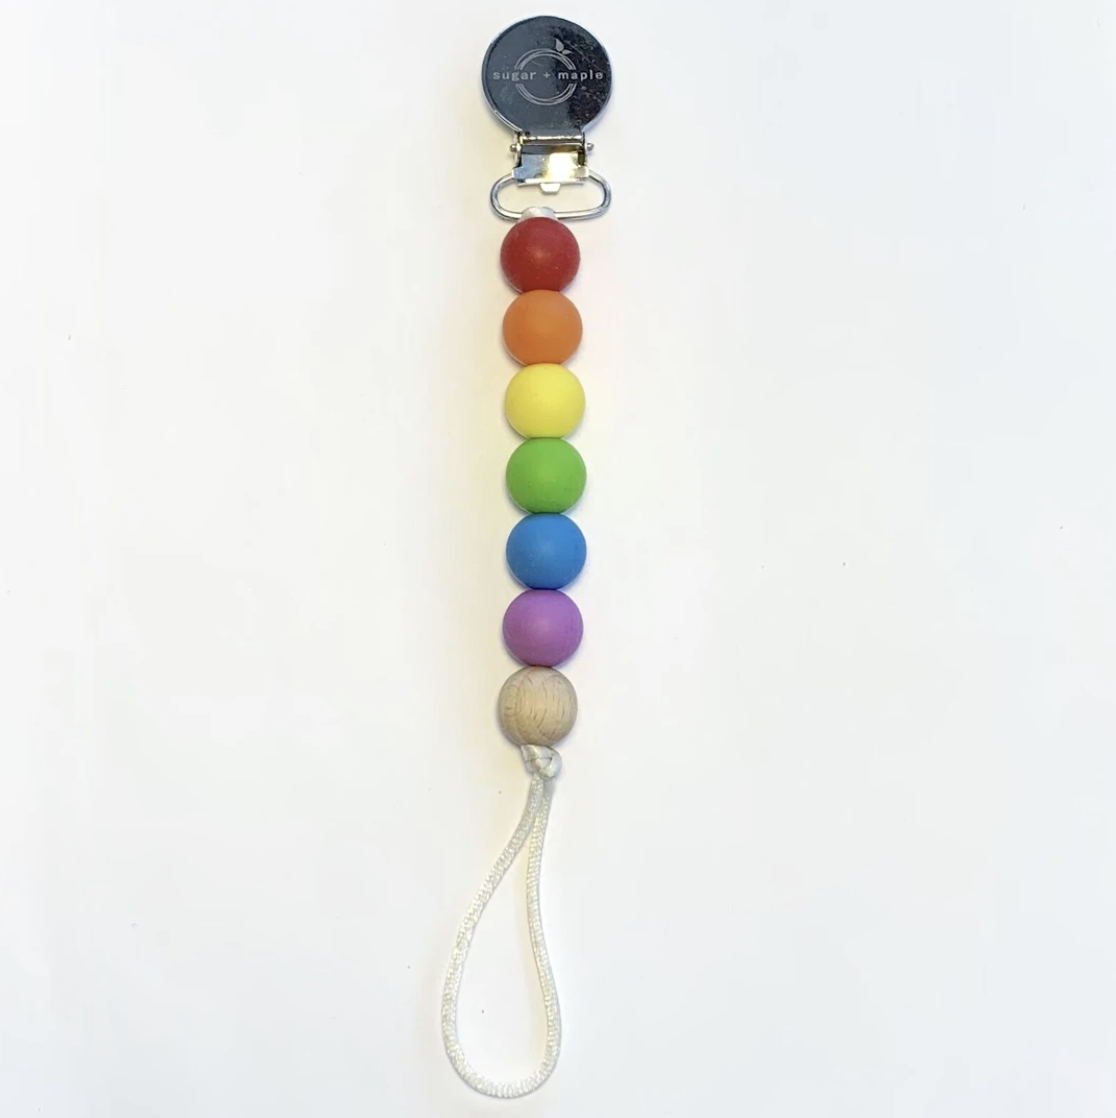 Sugar + Maple Paci + Teether Clip - Silicone with 1 Beechwood Bead-SUGAR AND MAPLE-Little Giant Kidz